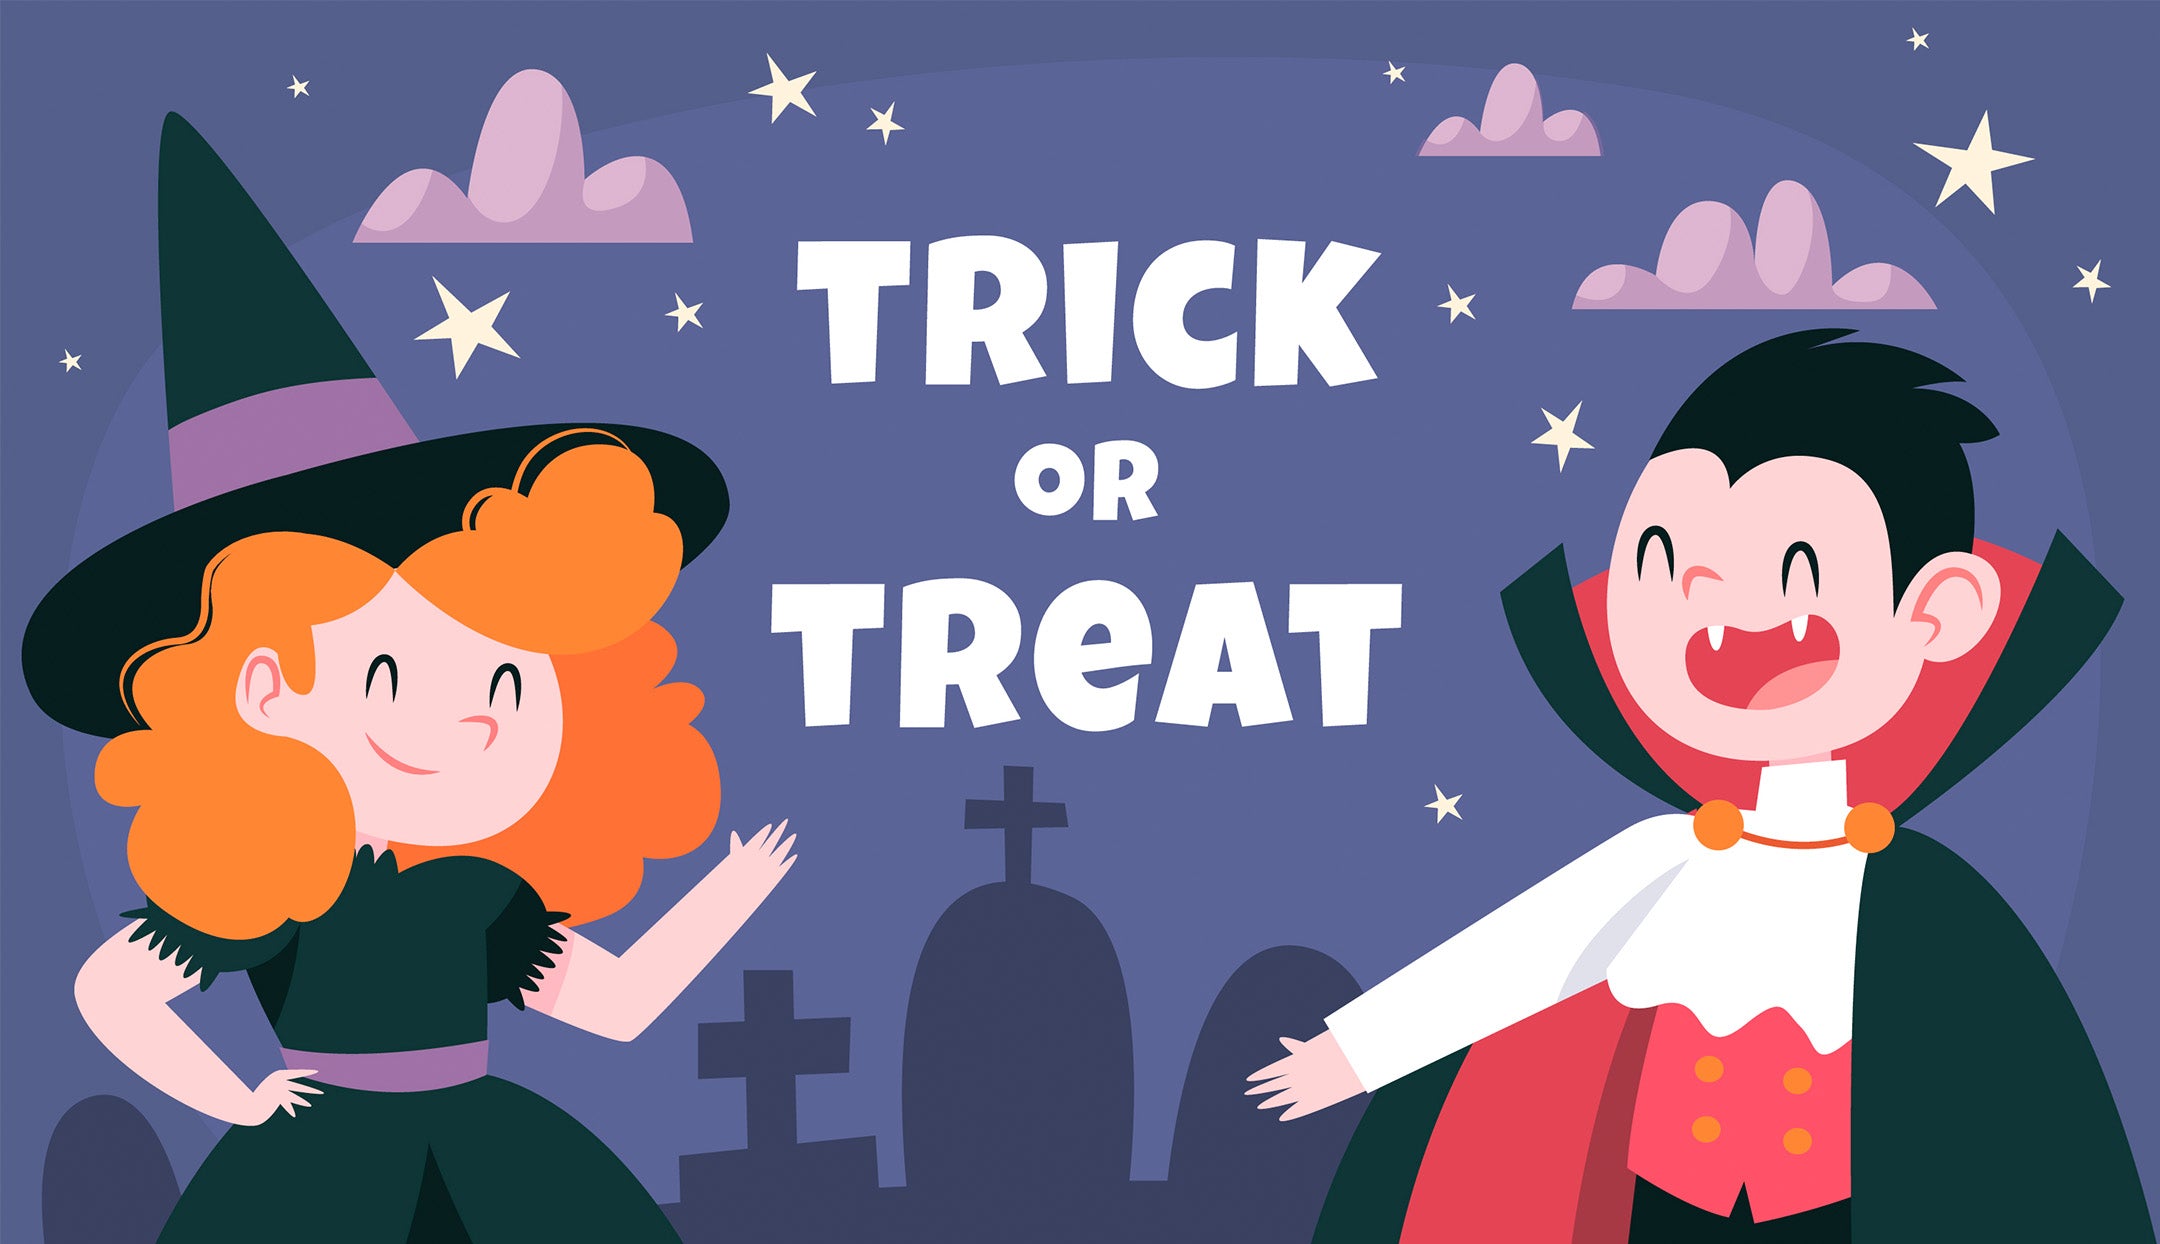 Unconventional Treats for Trick-or-Treaters